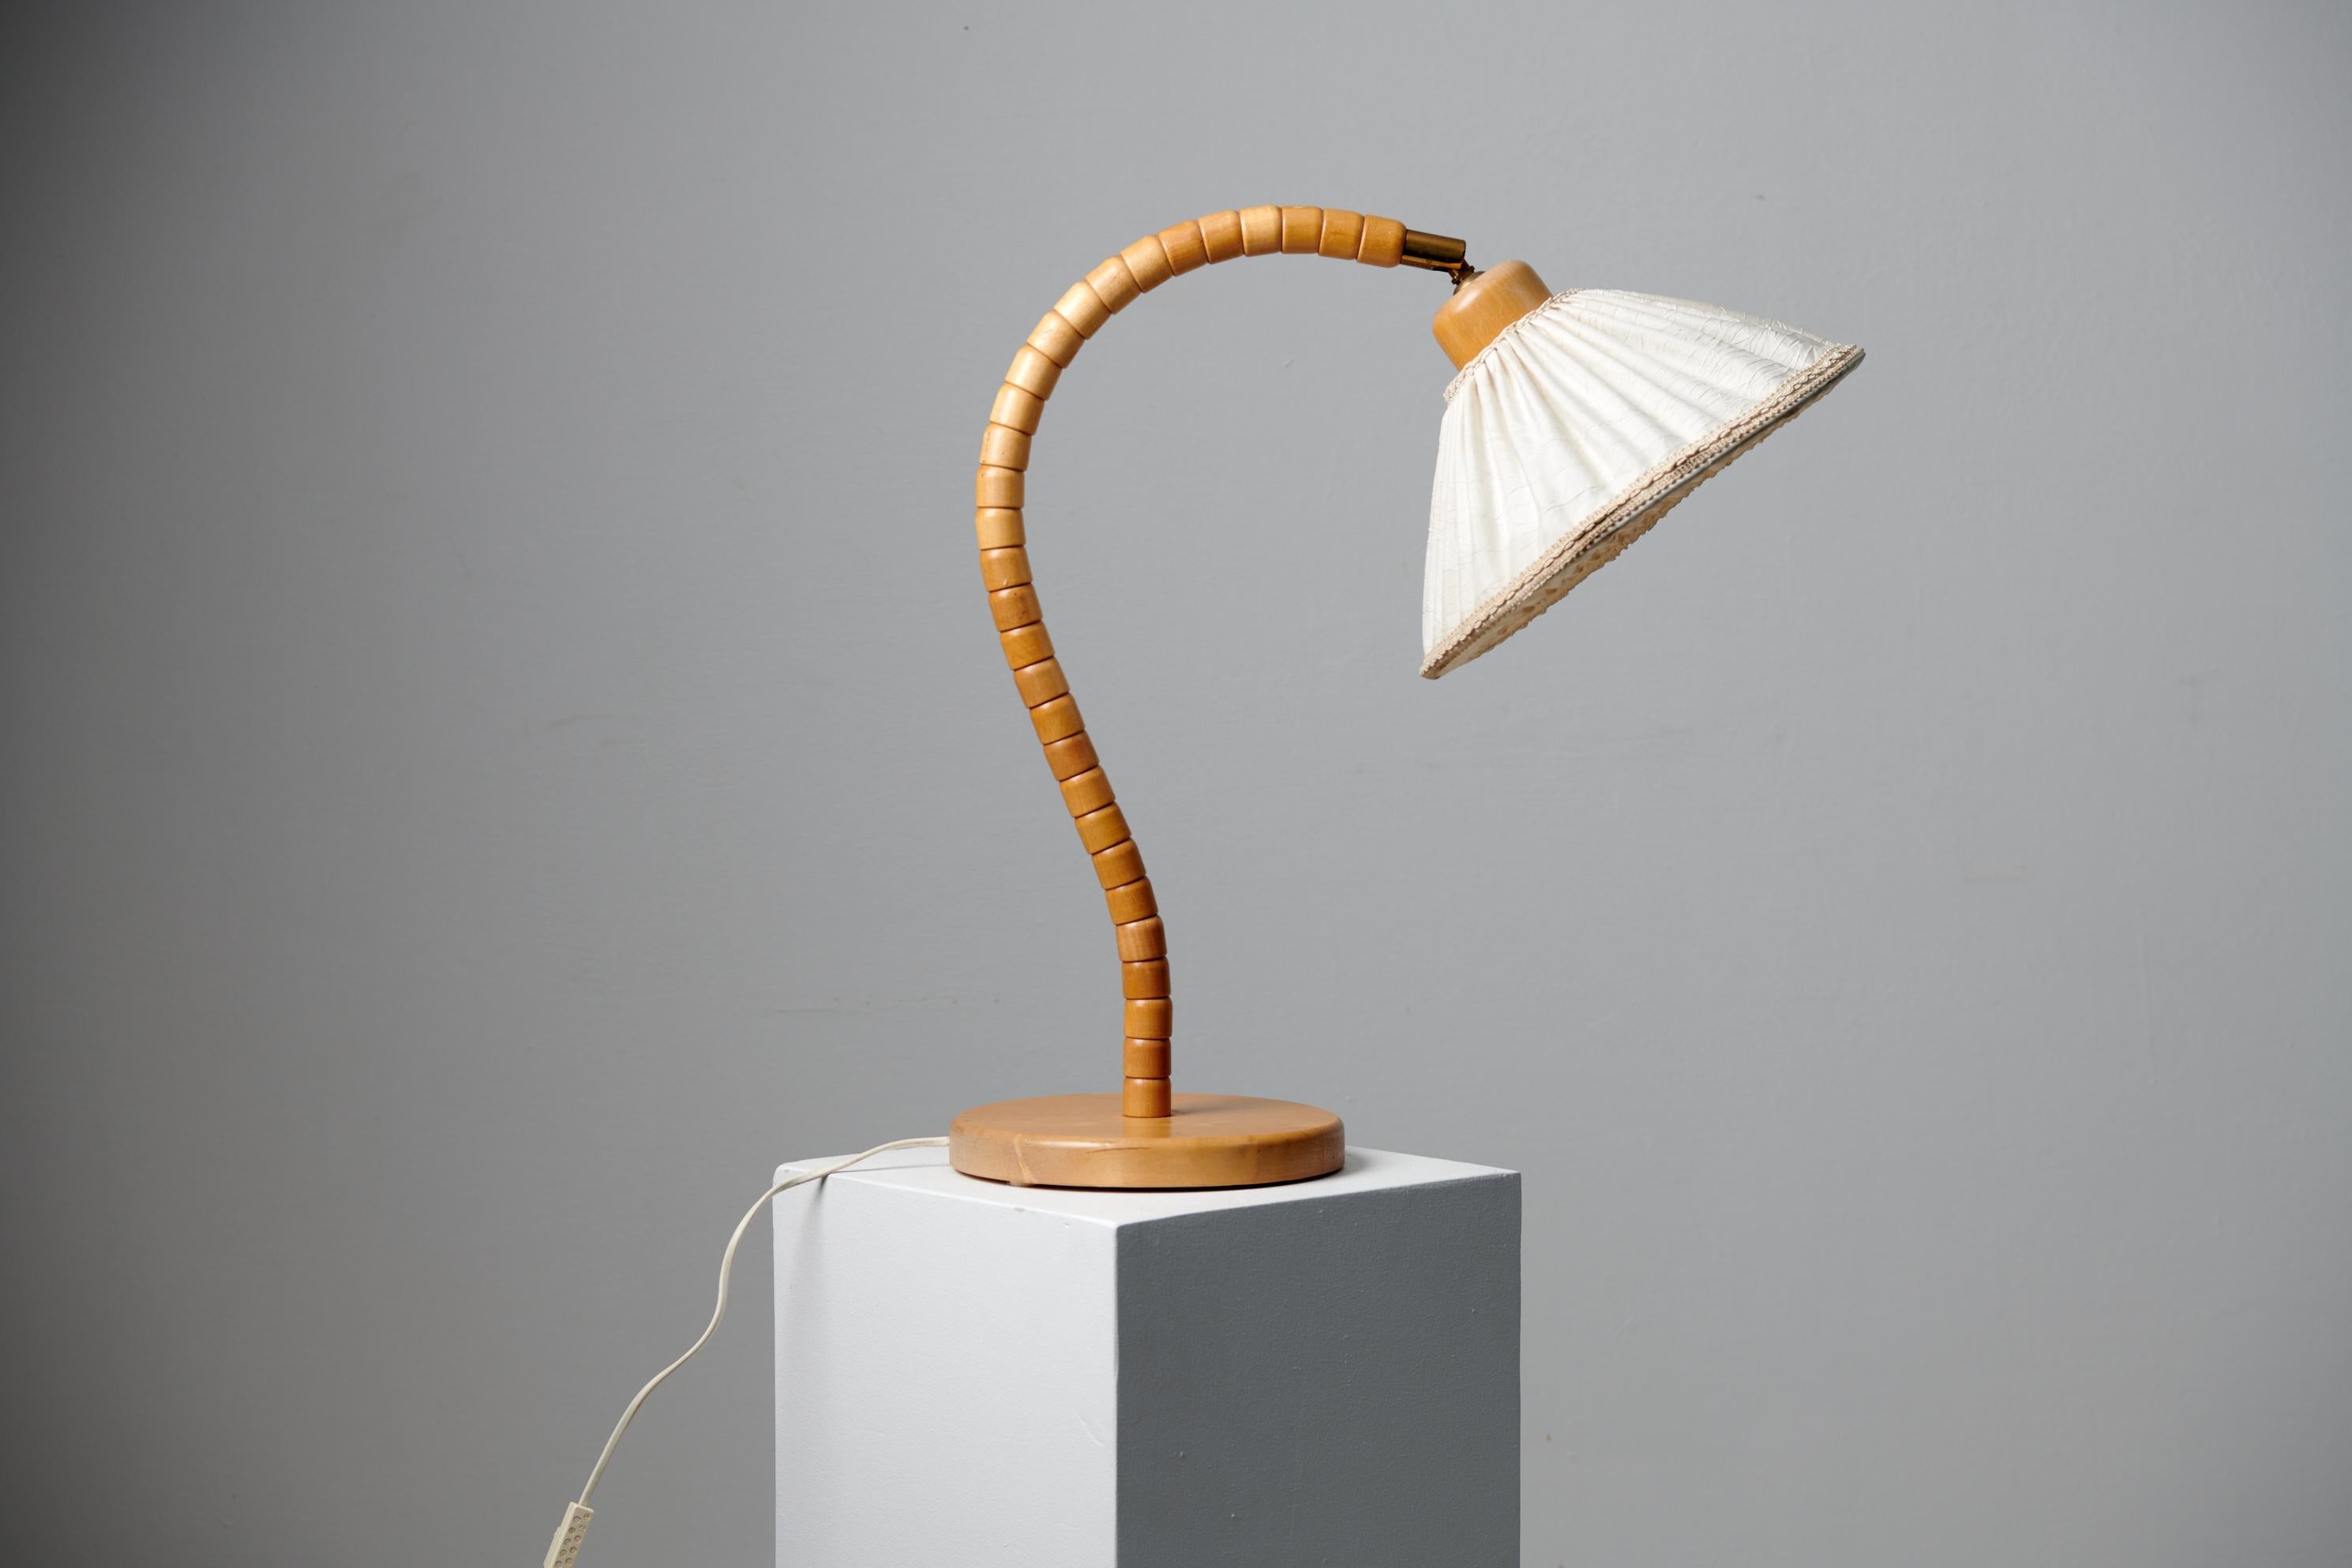 Scandinavian modern table lamp by Markslöjd Kinna Sweden, with a makers mark underneath. The lamp is from the 1960s and has a frame in birch. The end connecting to the lamp shade is in brass and the shade itself is the original linen. The lamp has